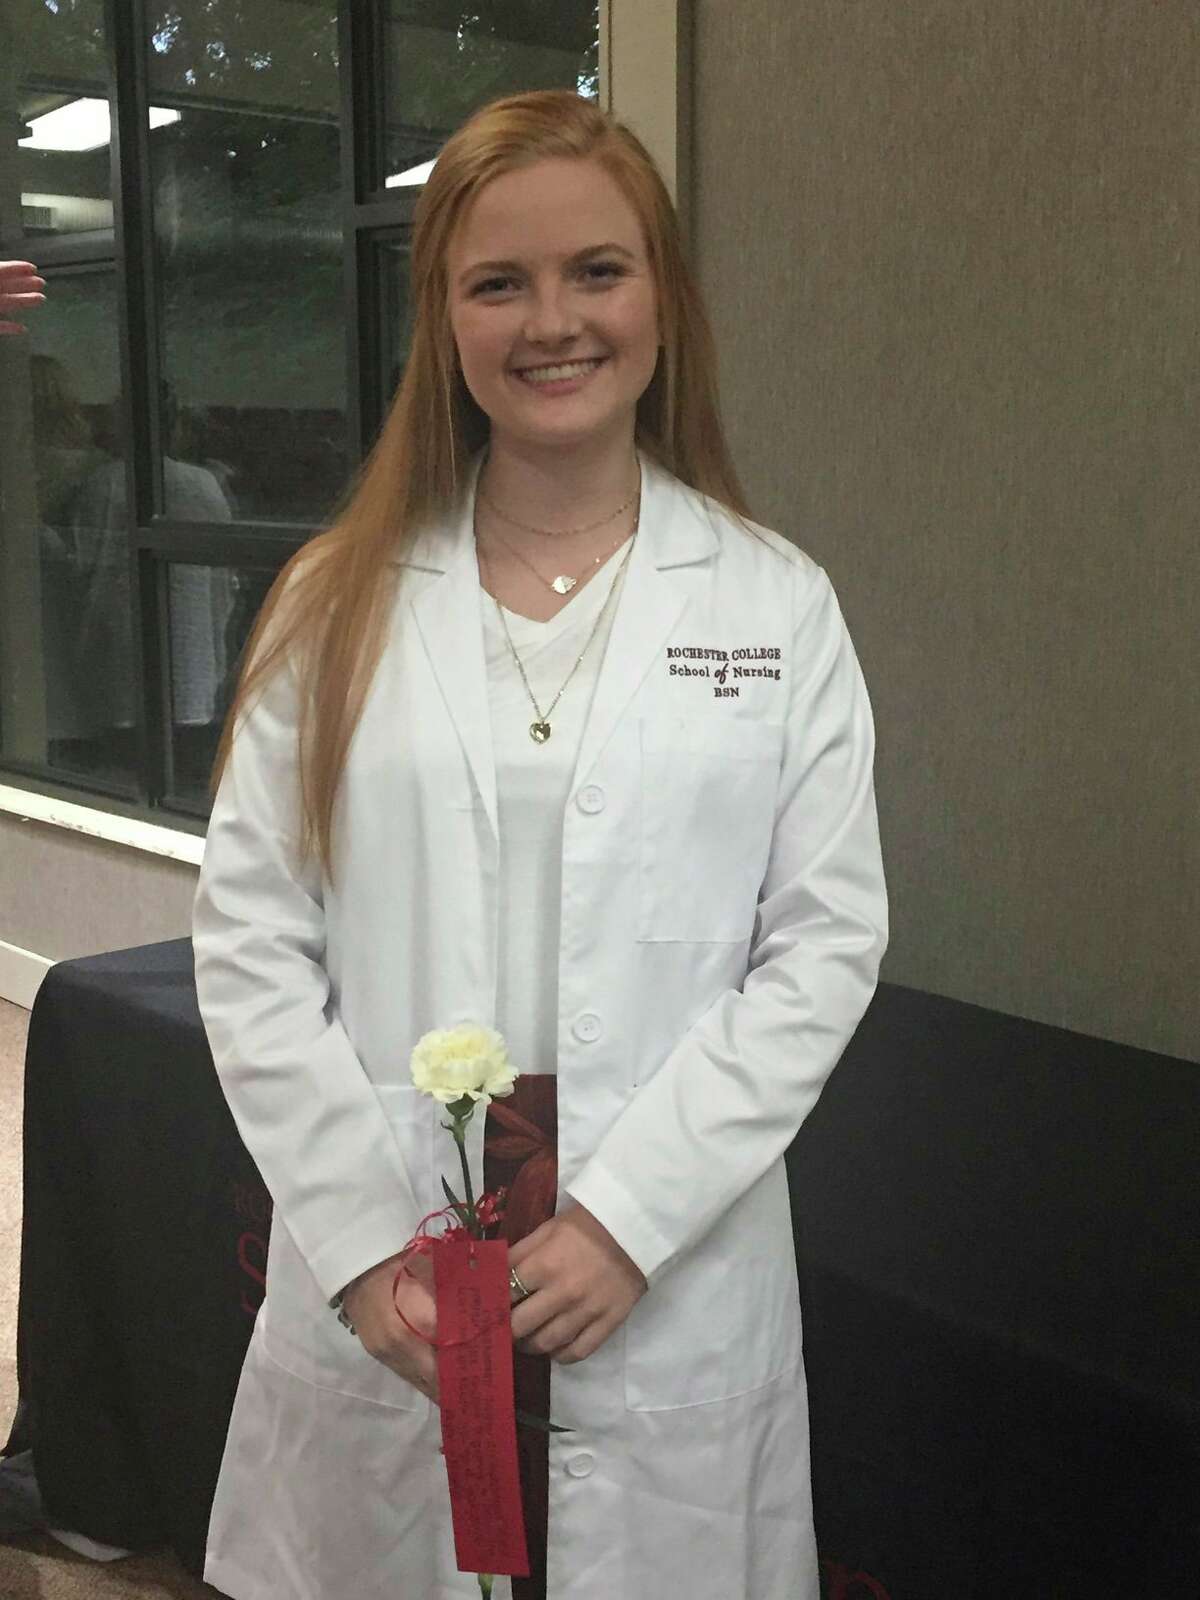 Alli Shea poses in a lab coat at Rochester College.